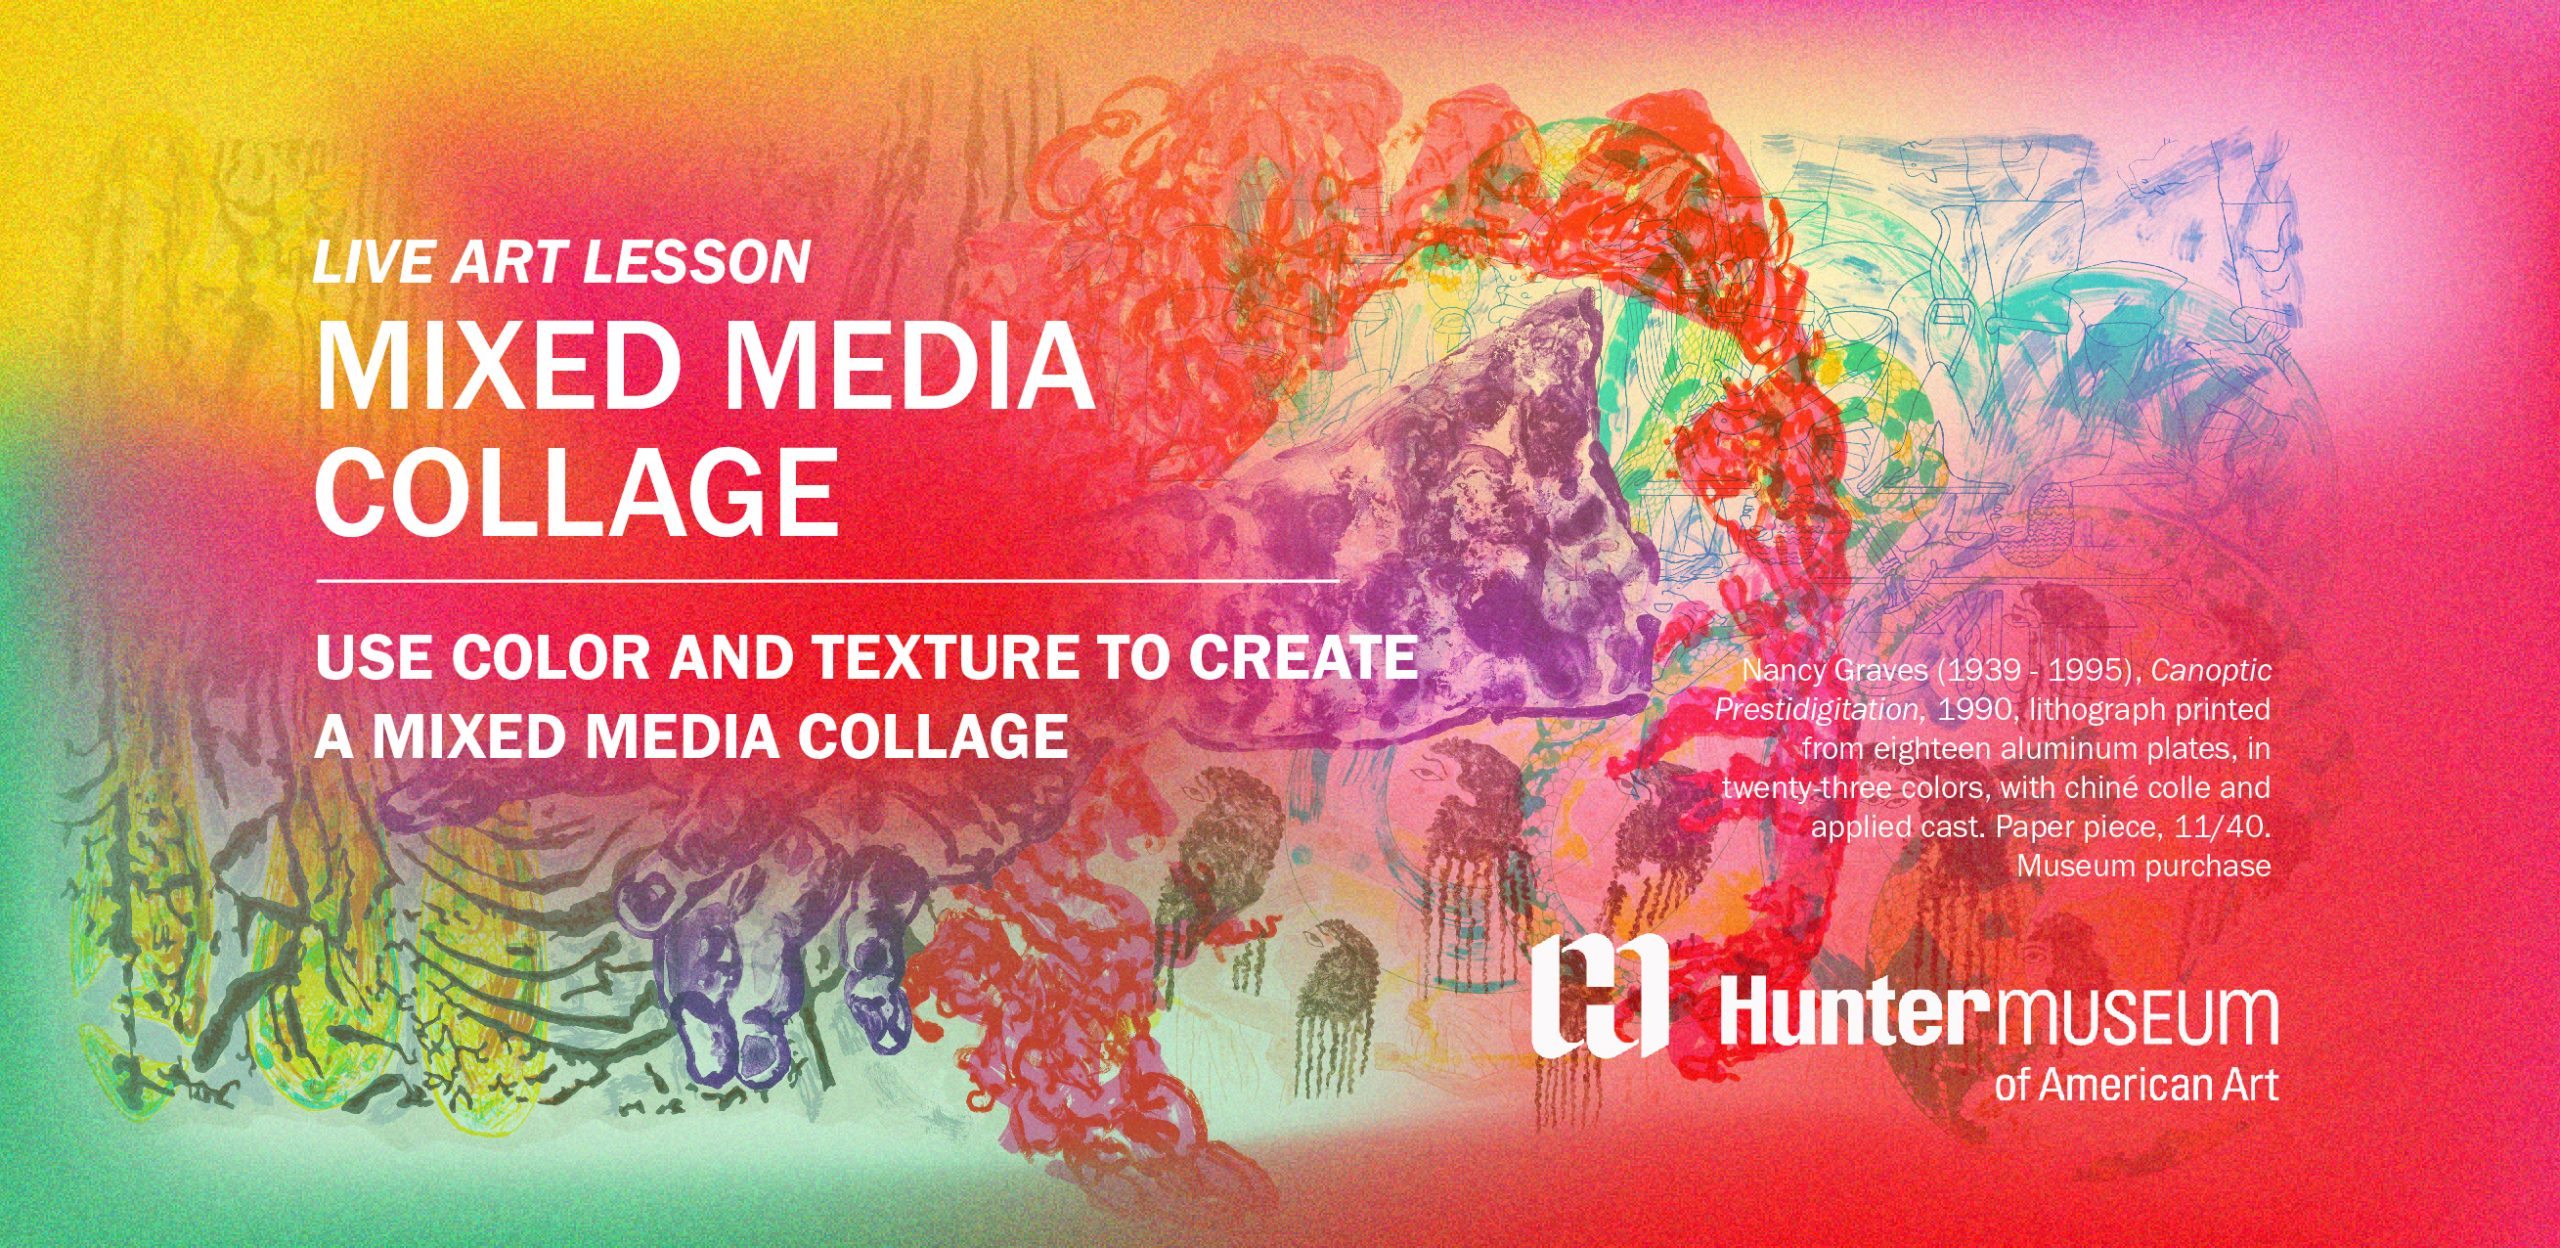 Background of colorful graphic designs. Text reads, "Use color and texture to create a mixed media collage."